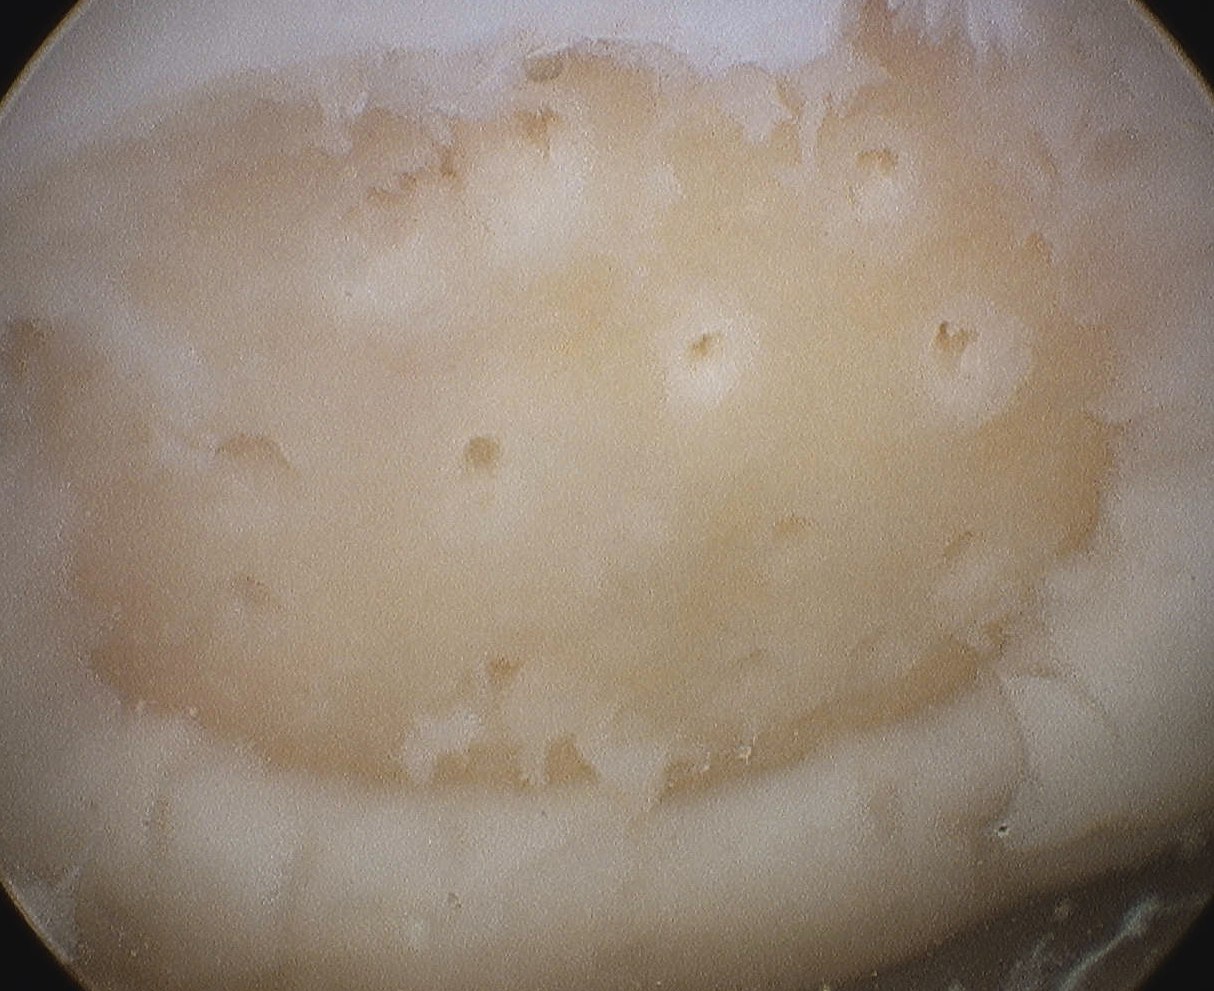 Microfracture Awl Holes